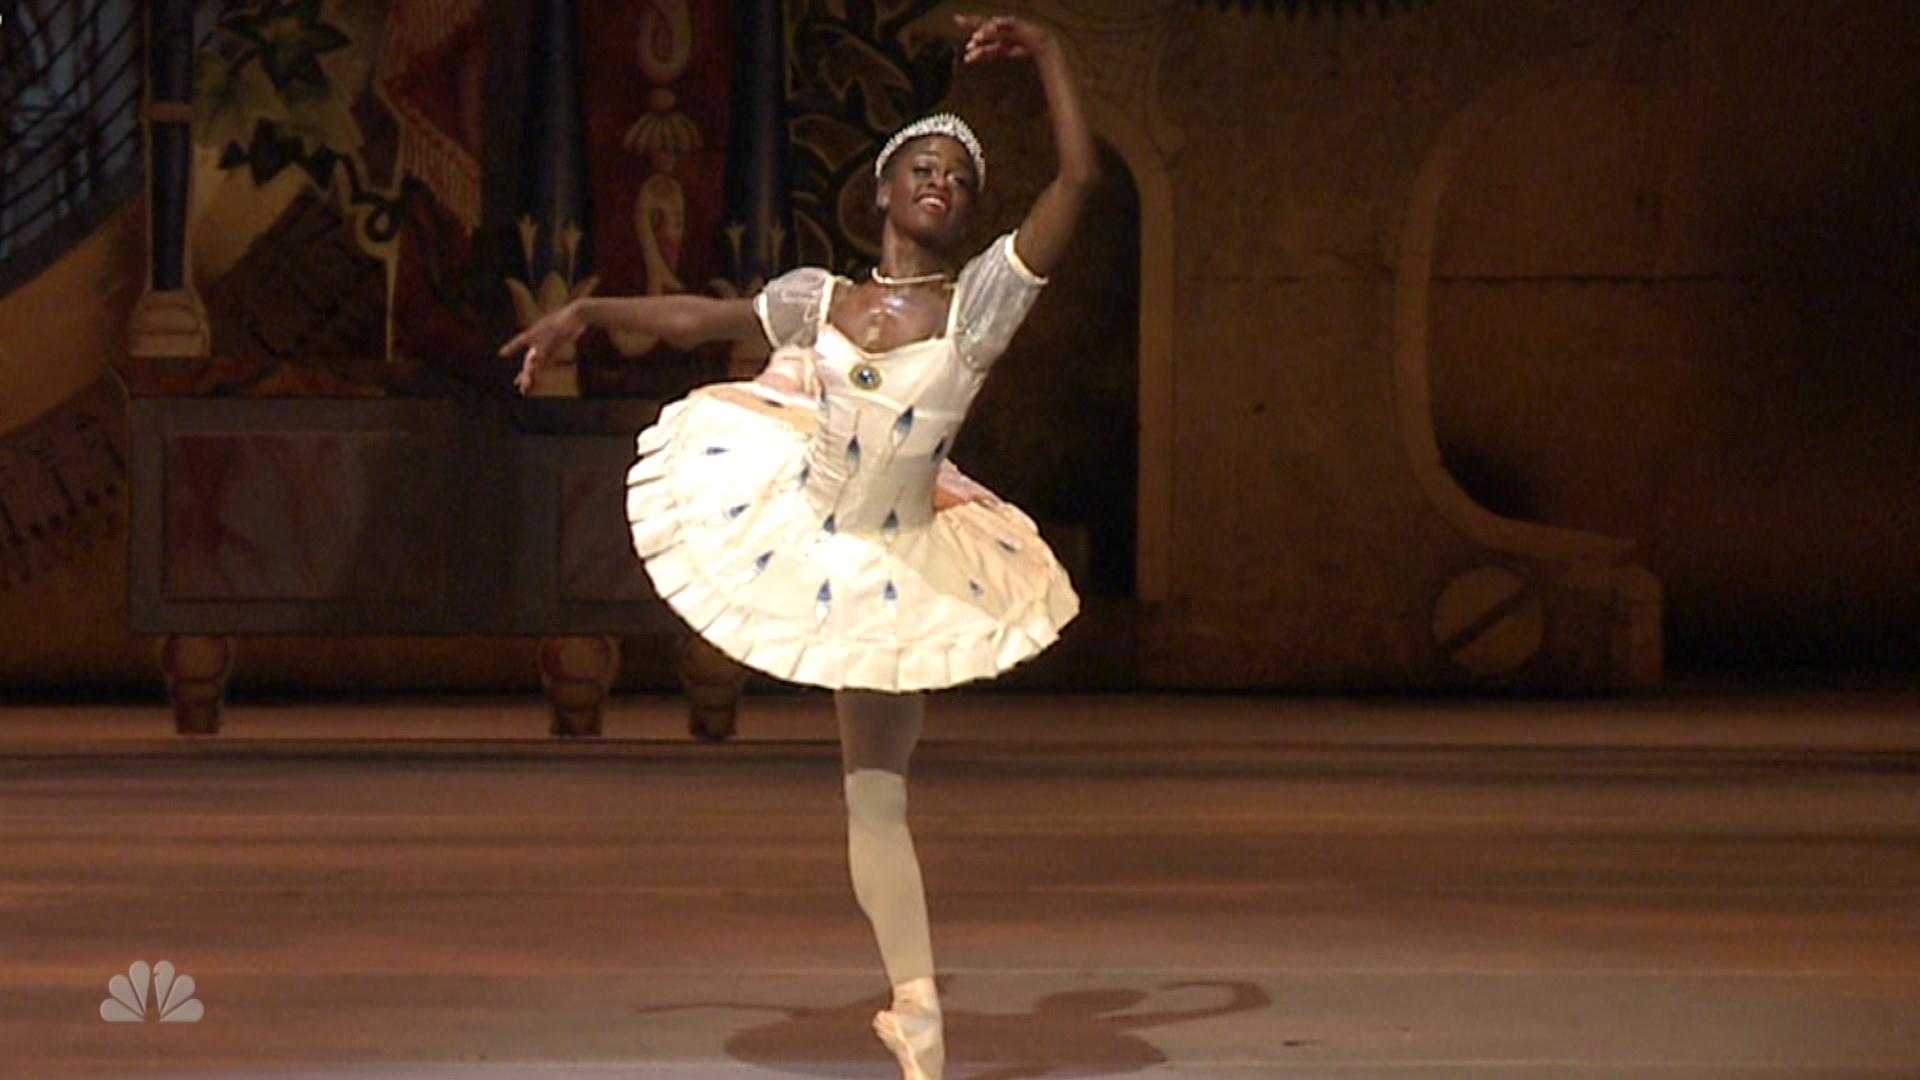 PREVIEW: From Orphan in War-Torn Sierra Leone to Ballet Star ... - NBCNews.com